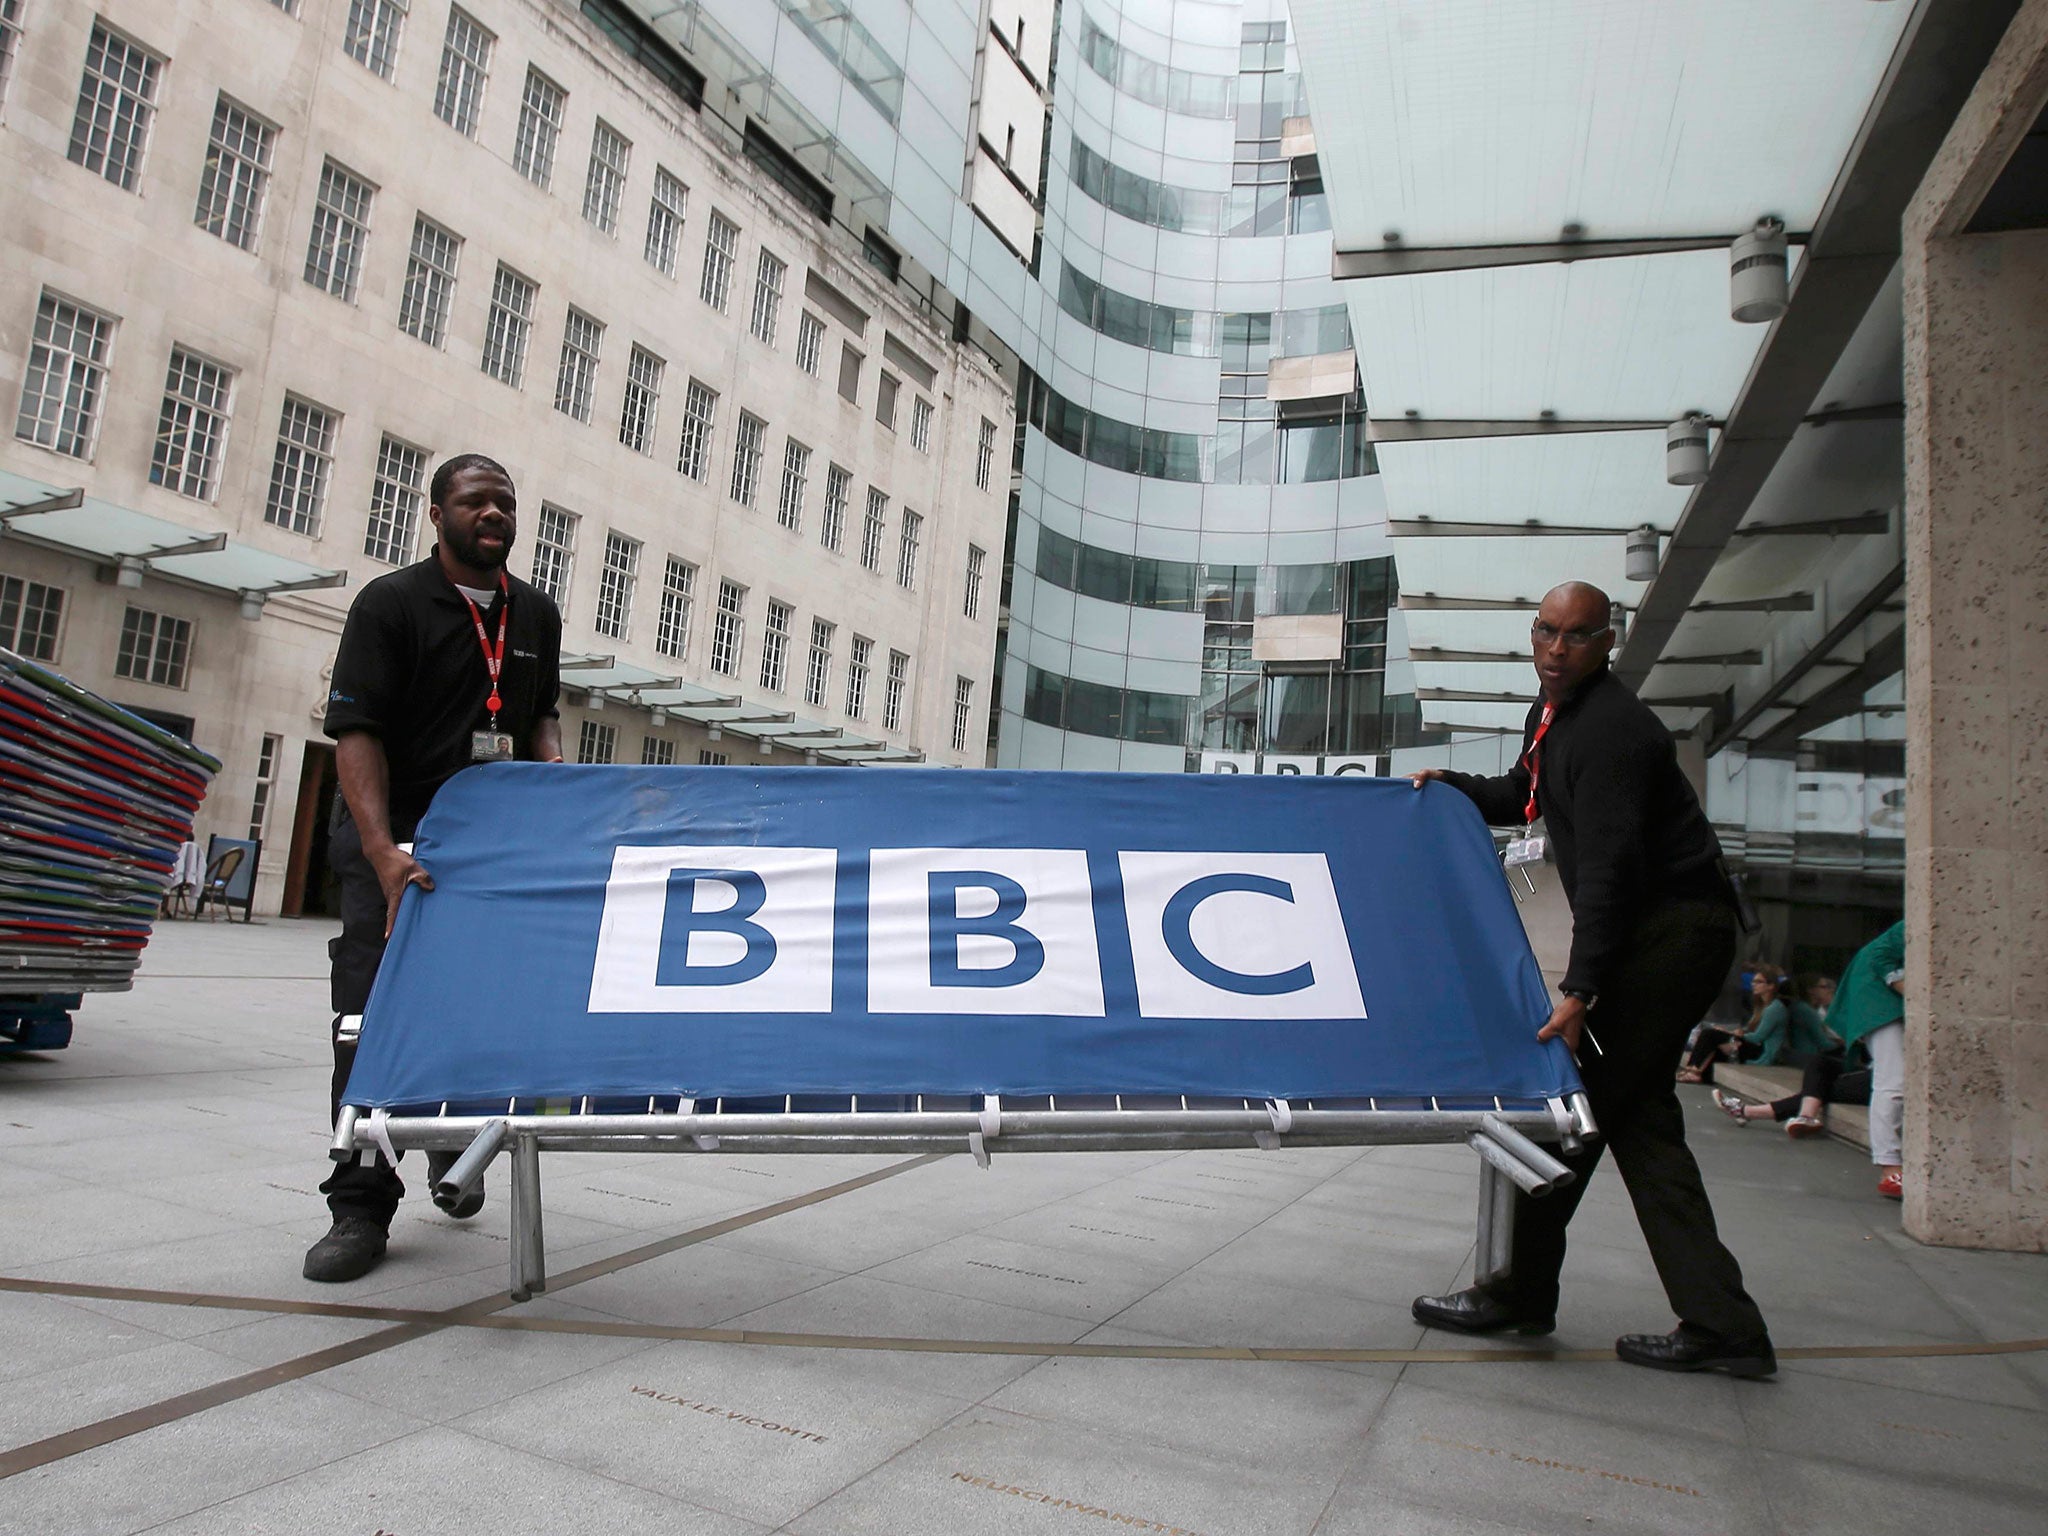 All change at the BBC – at least, if the Government gets its way. The Corporation says the proposals ignore public opinion